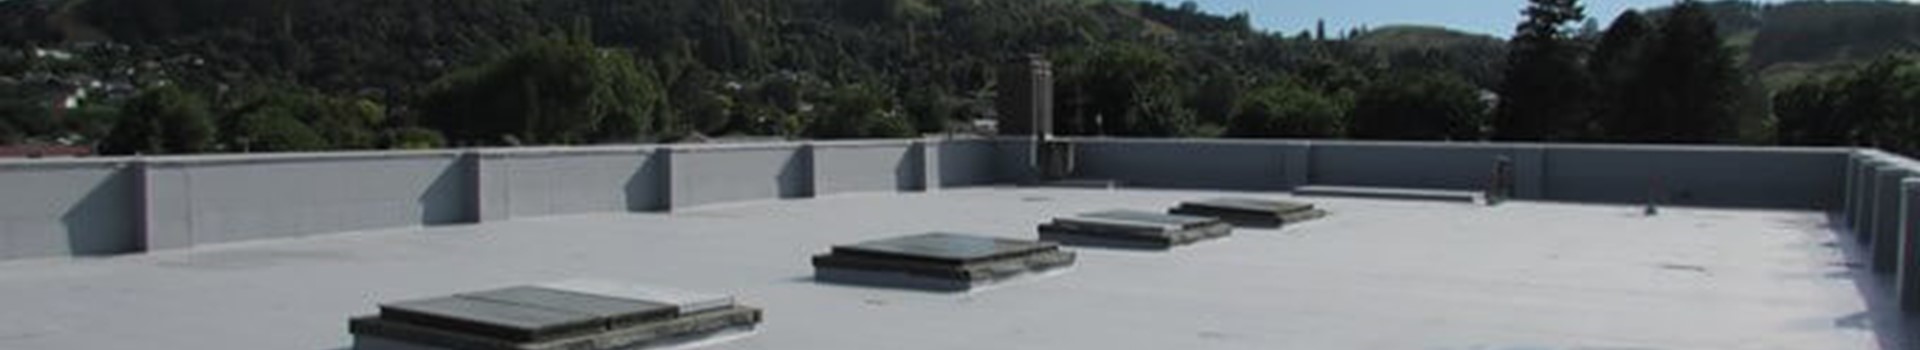 Re-roofing - knowing your options